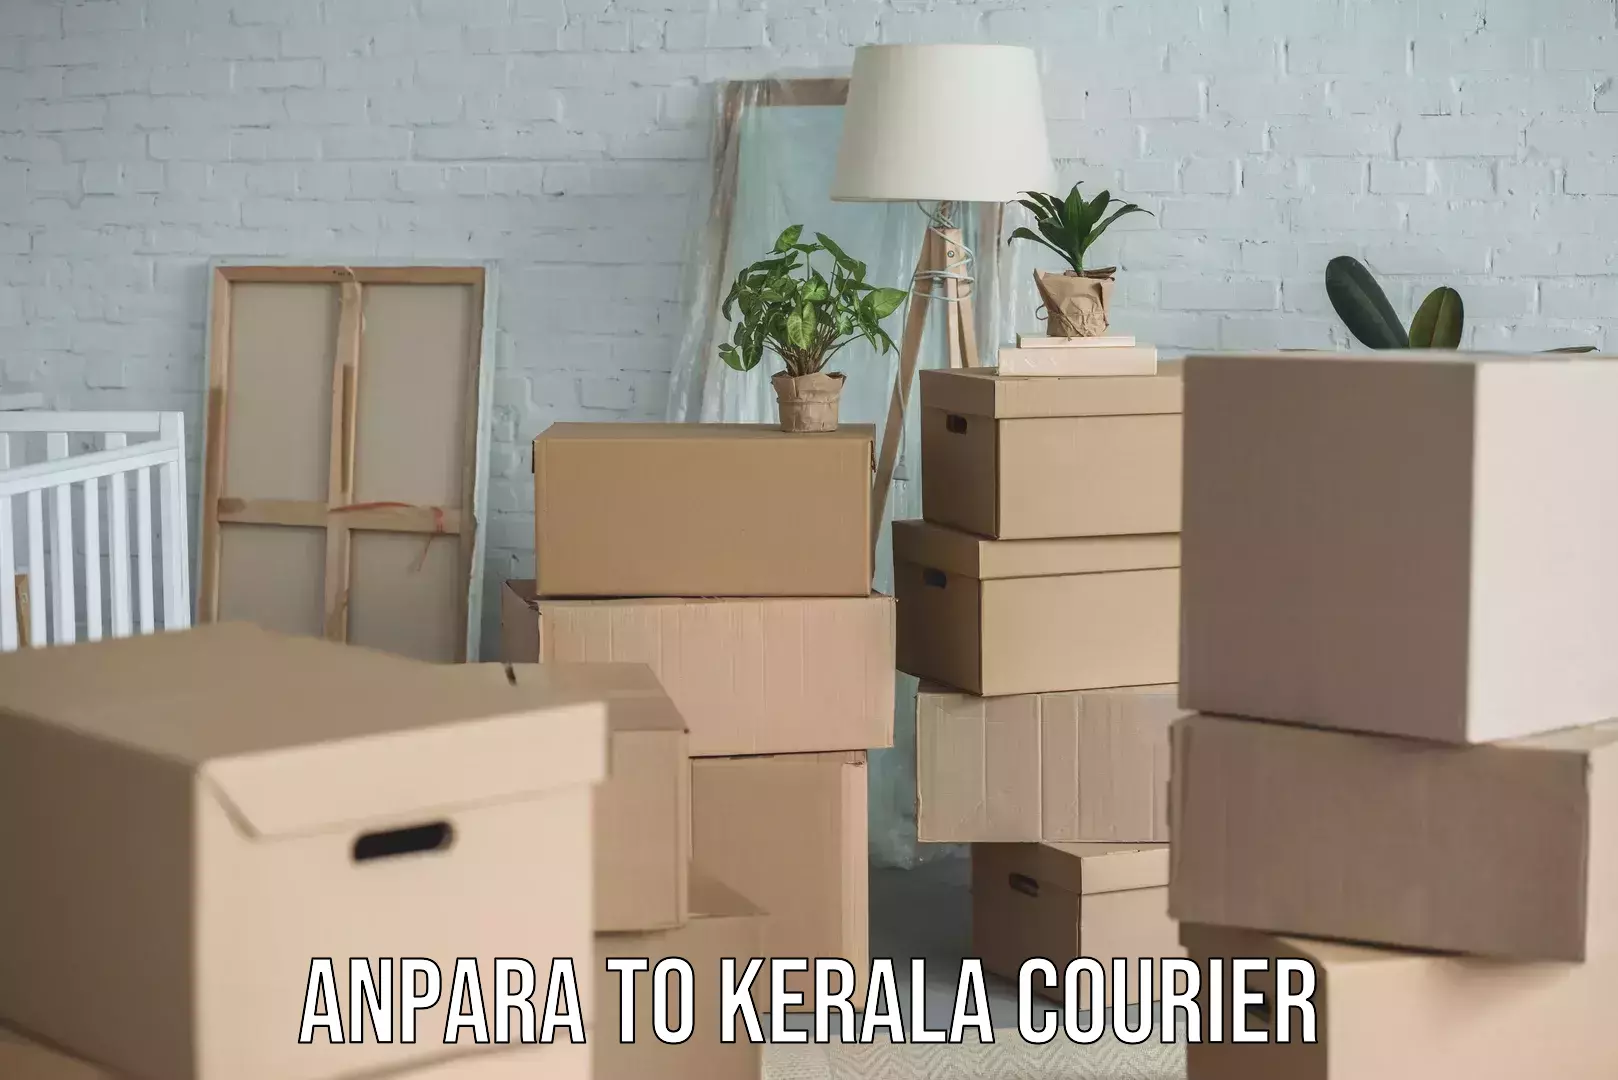 Express delivery network Anpara to Kerala